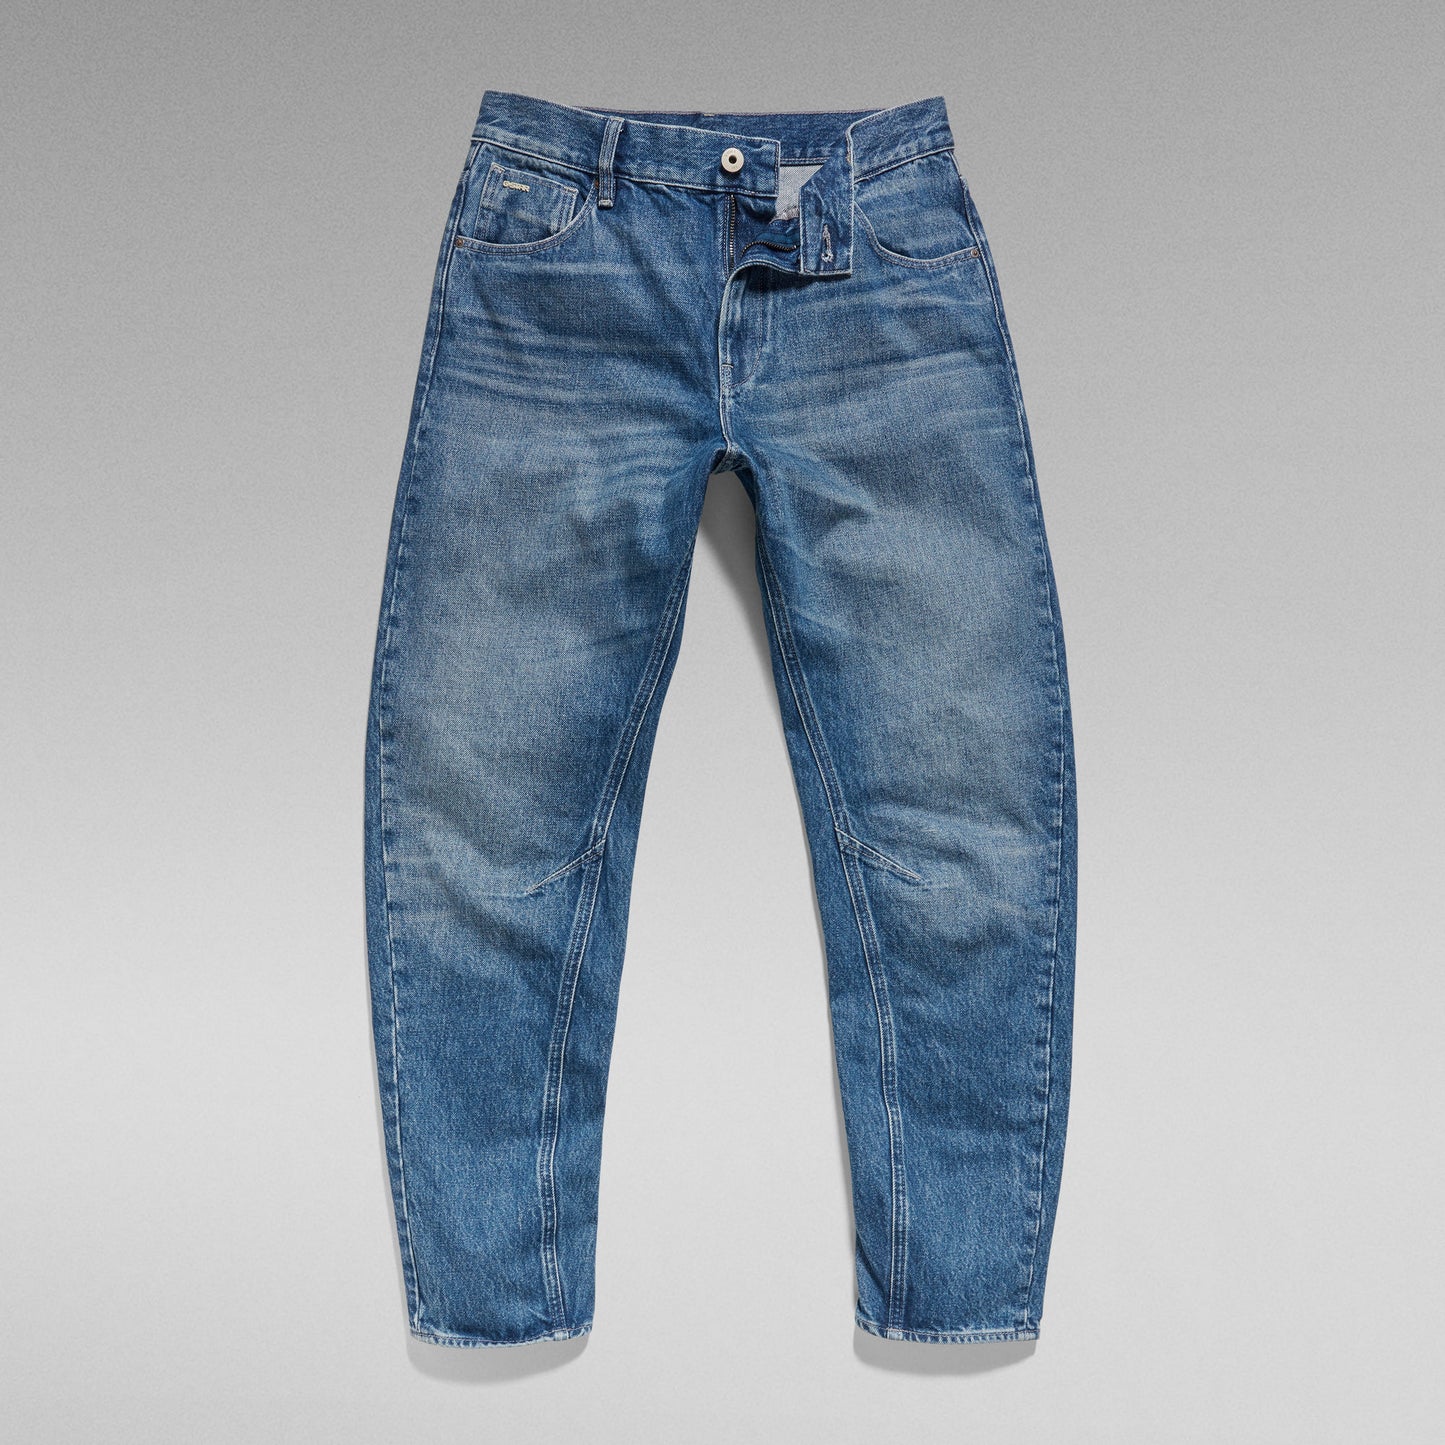 JEANS ARC 3D STONE WASHED